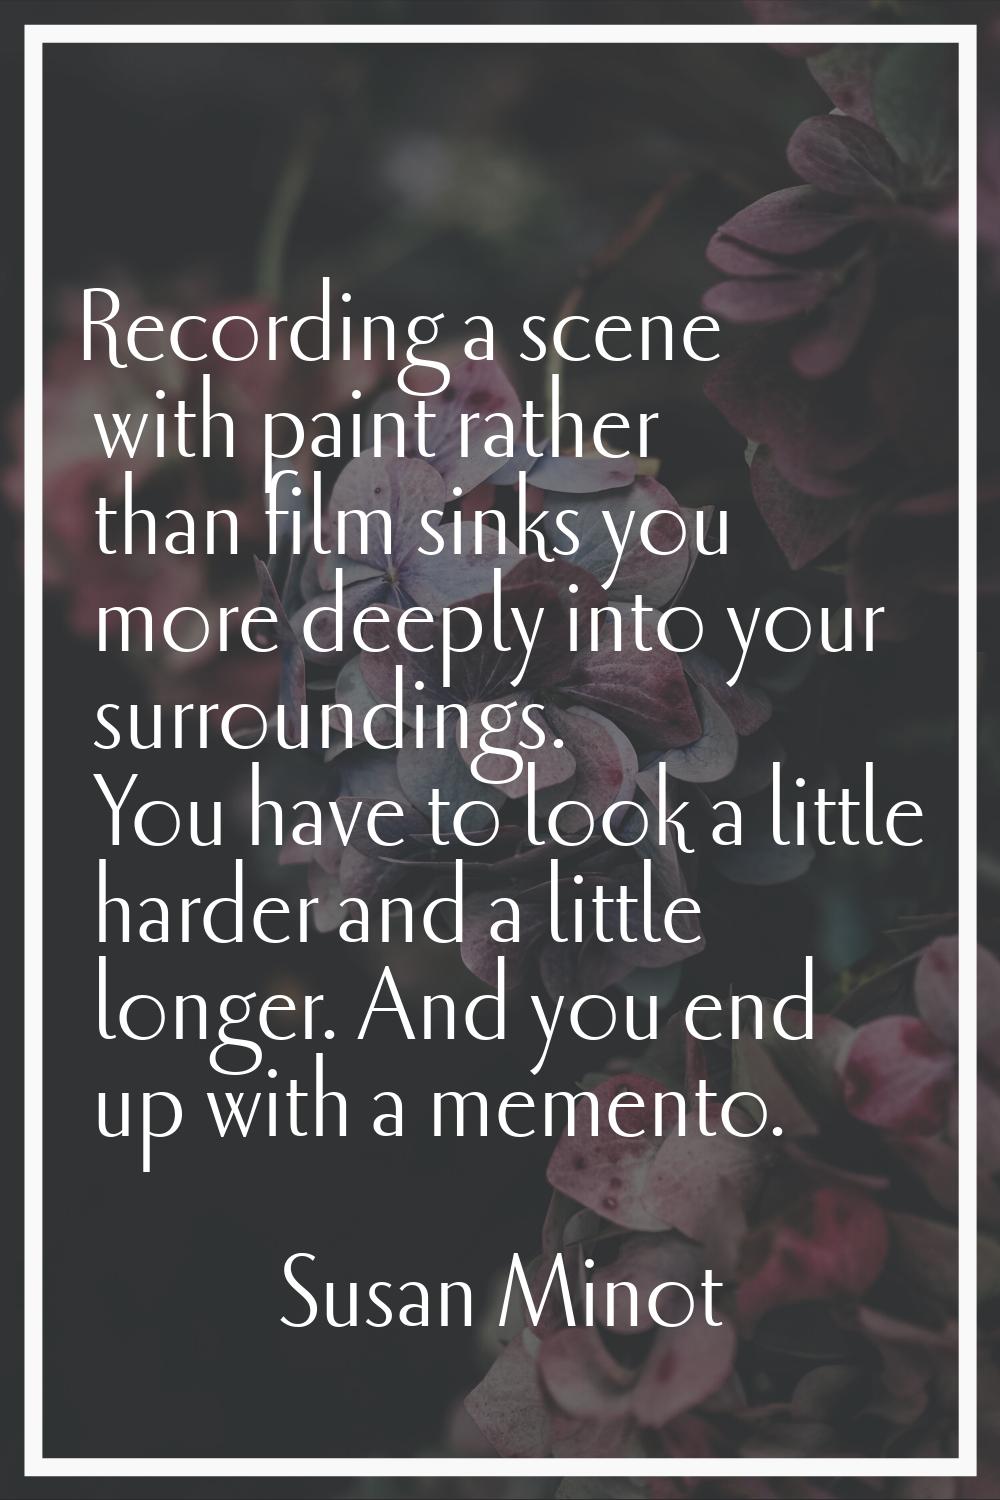 Recording a scene with paint rather than film sinks you more deeply into your surroundings. You hav